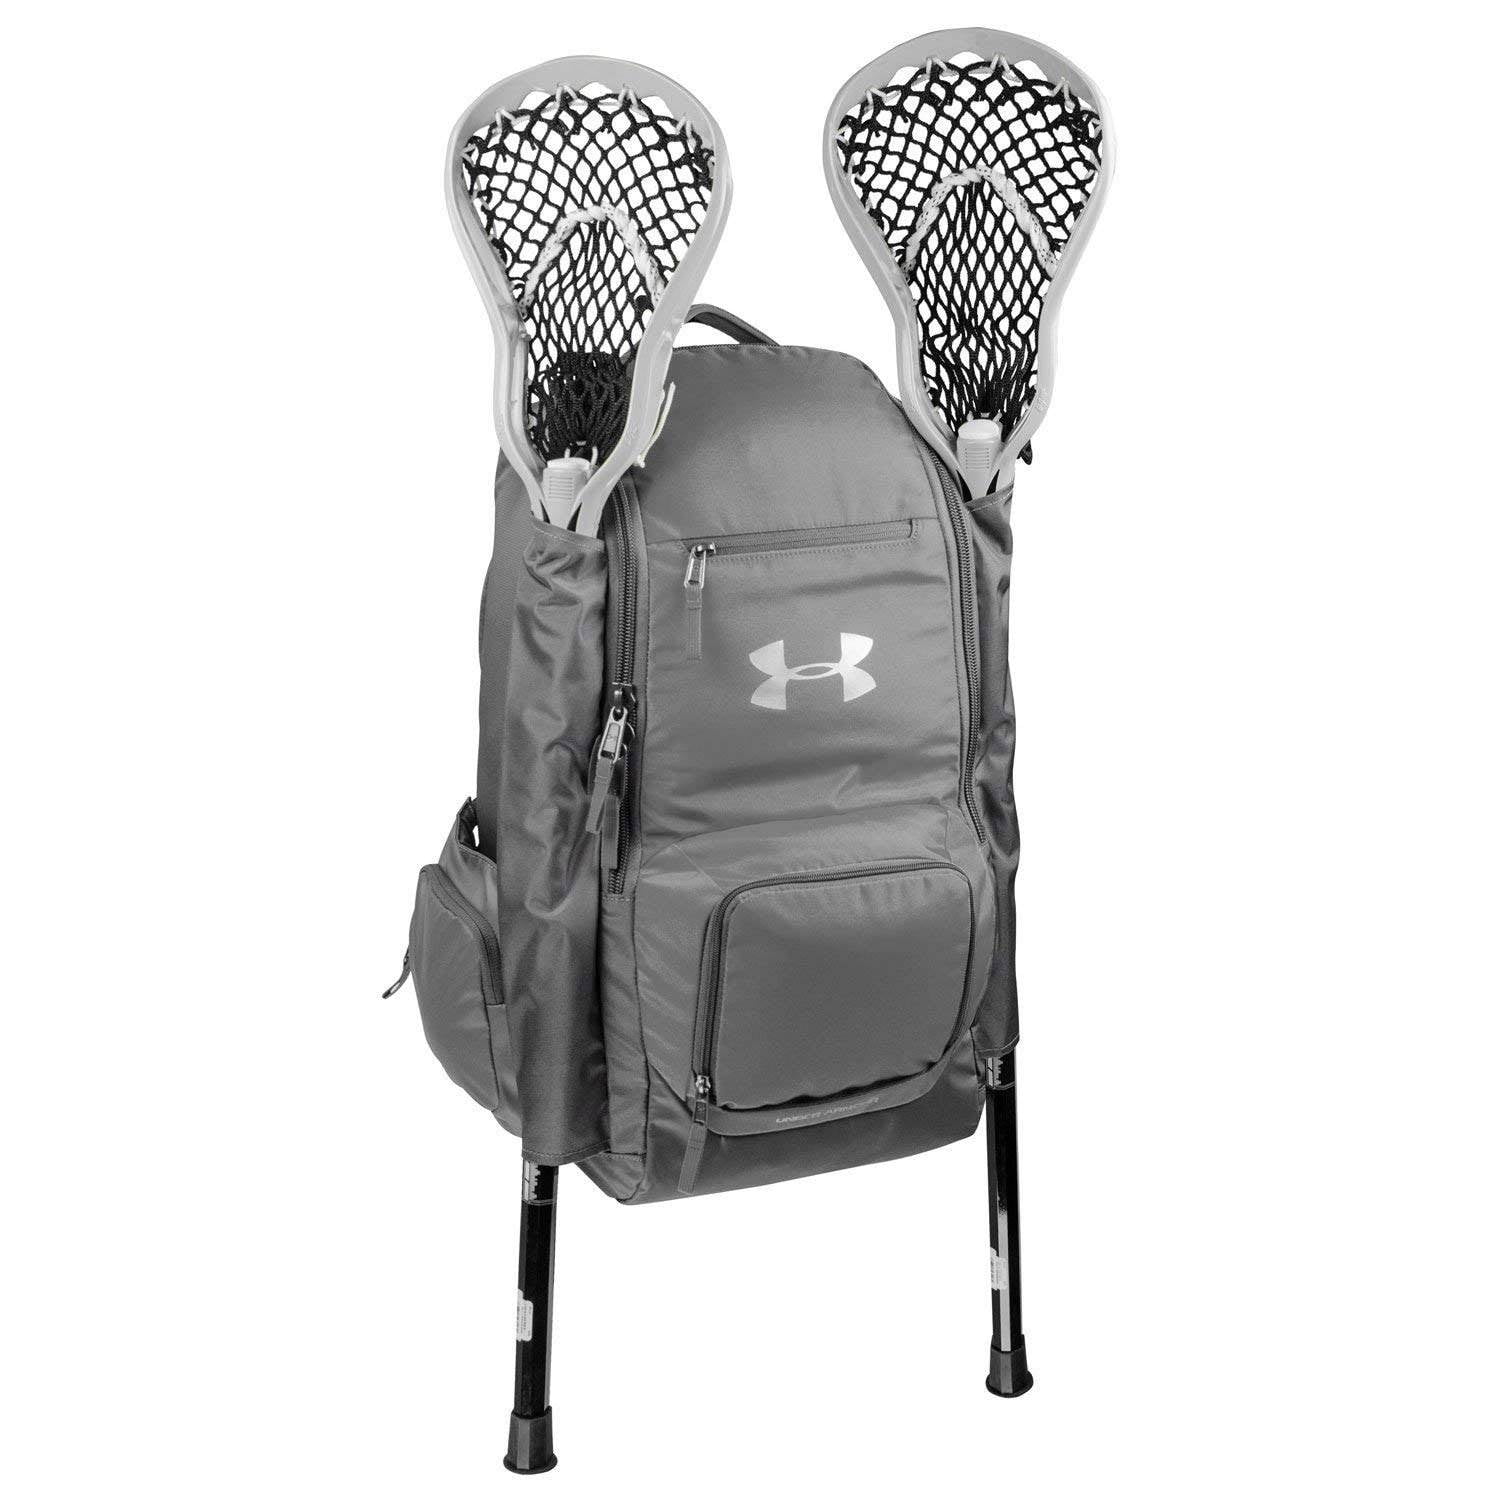 Under Armour 2 Stick Water Resistant Lacrosse Equipment Gear Backpack Bag, Gray - Walmart.com 